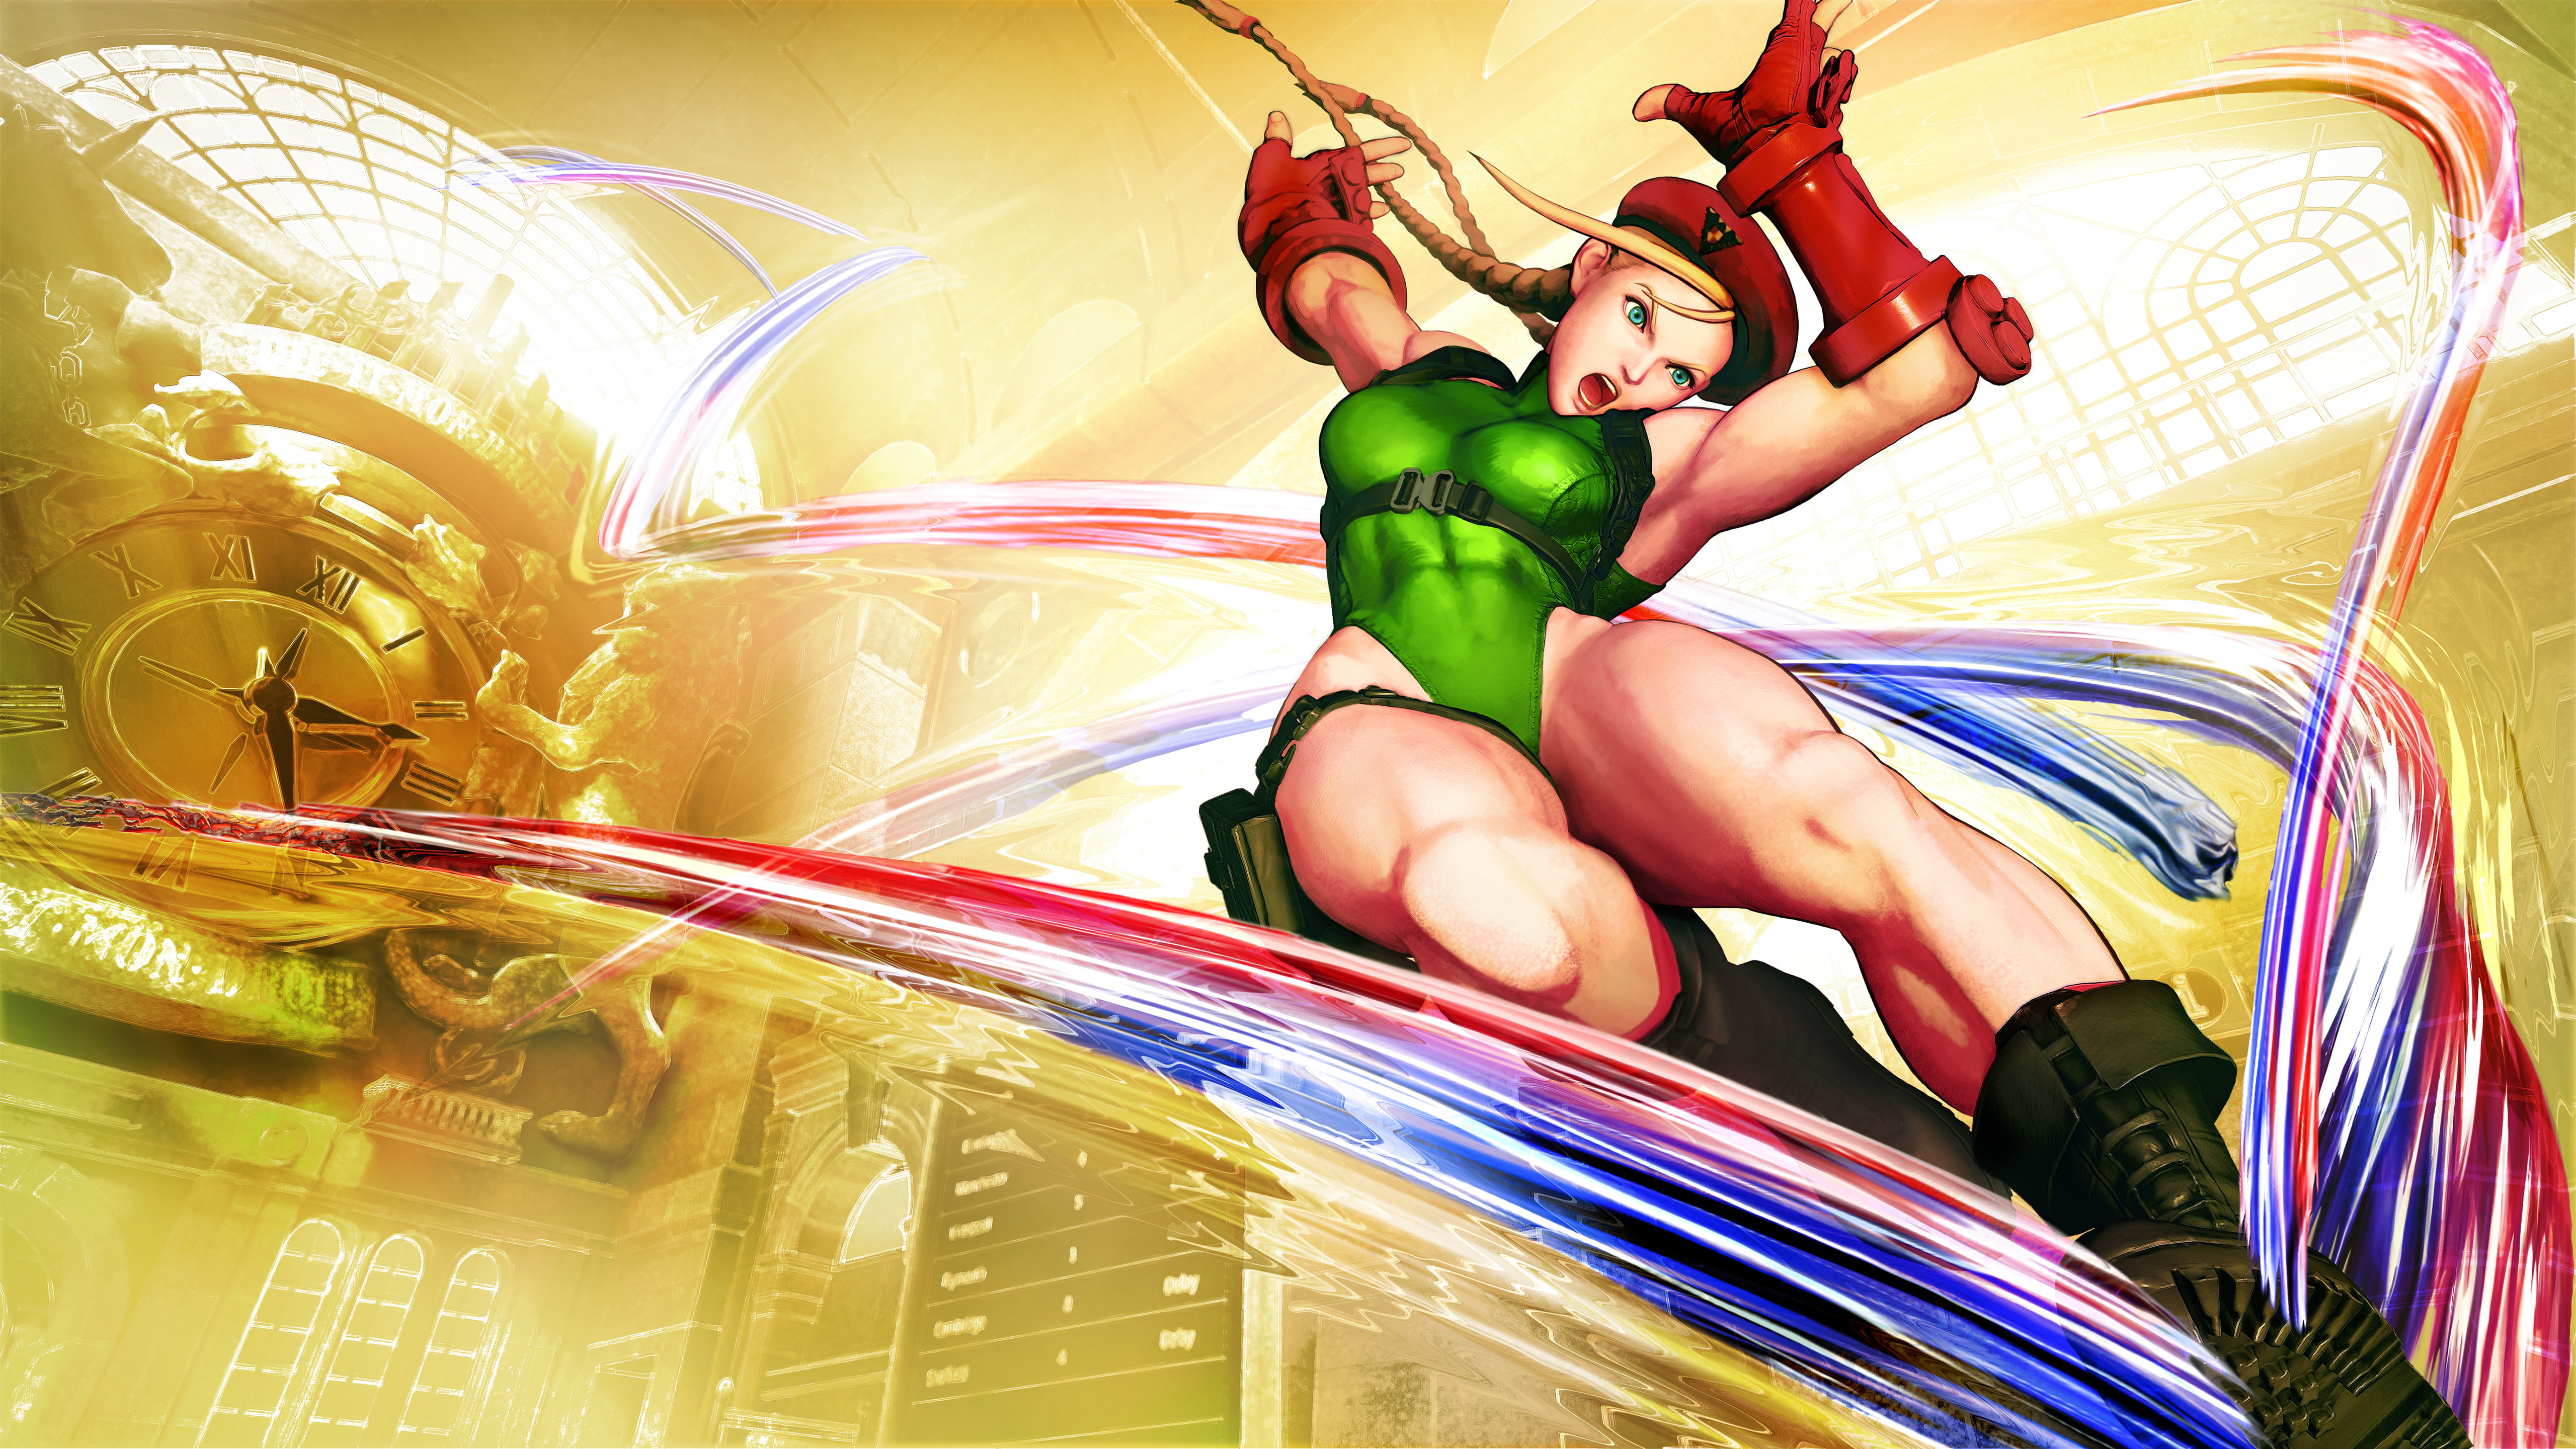 woman wearing green onepiece and red hat graphic wallpaper, Cammy